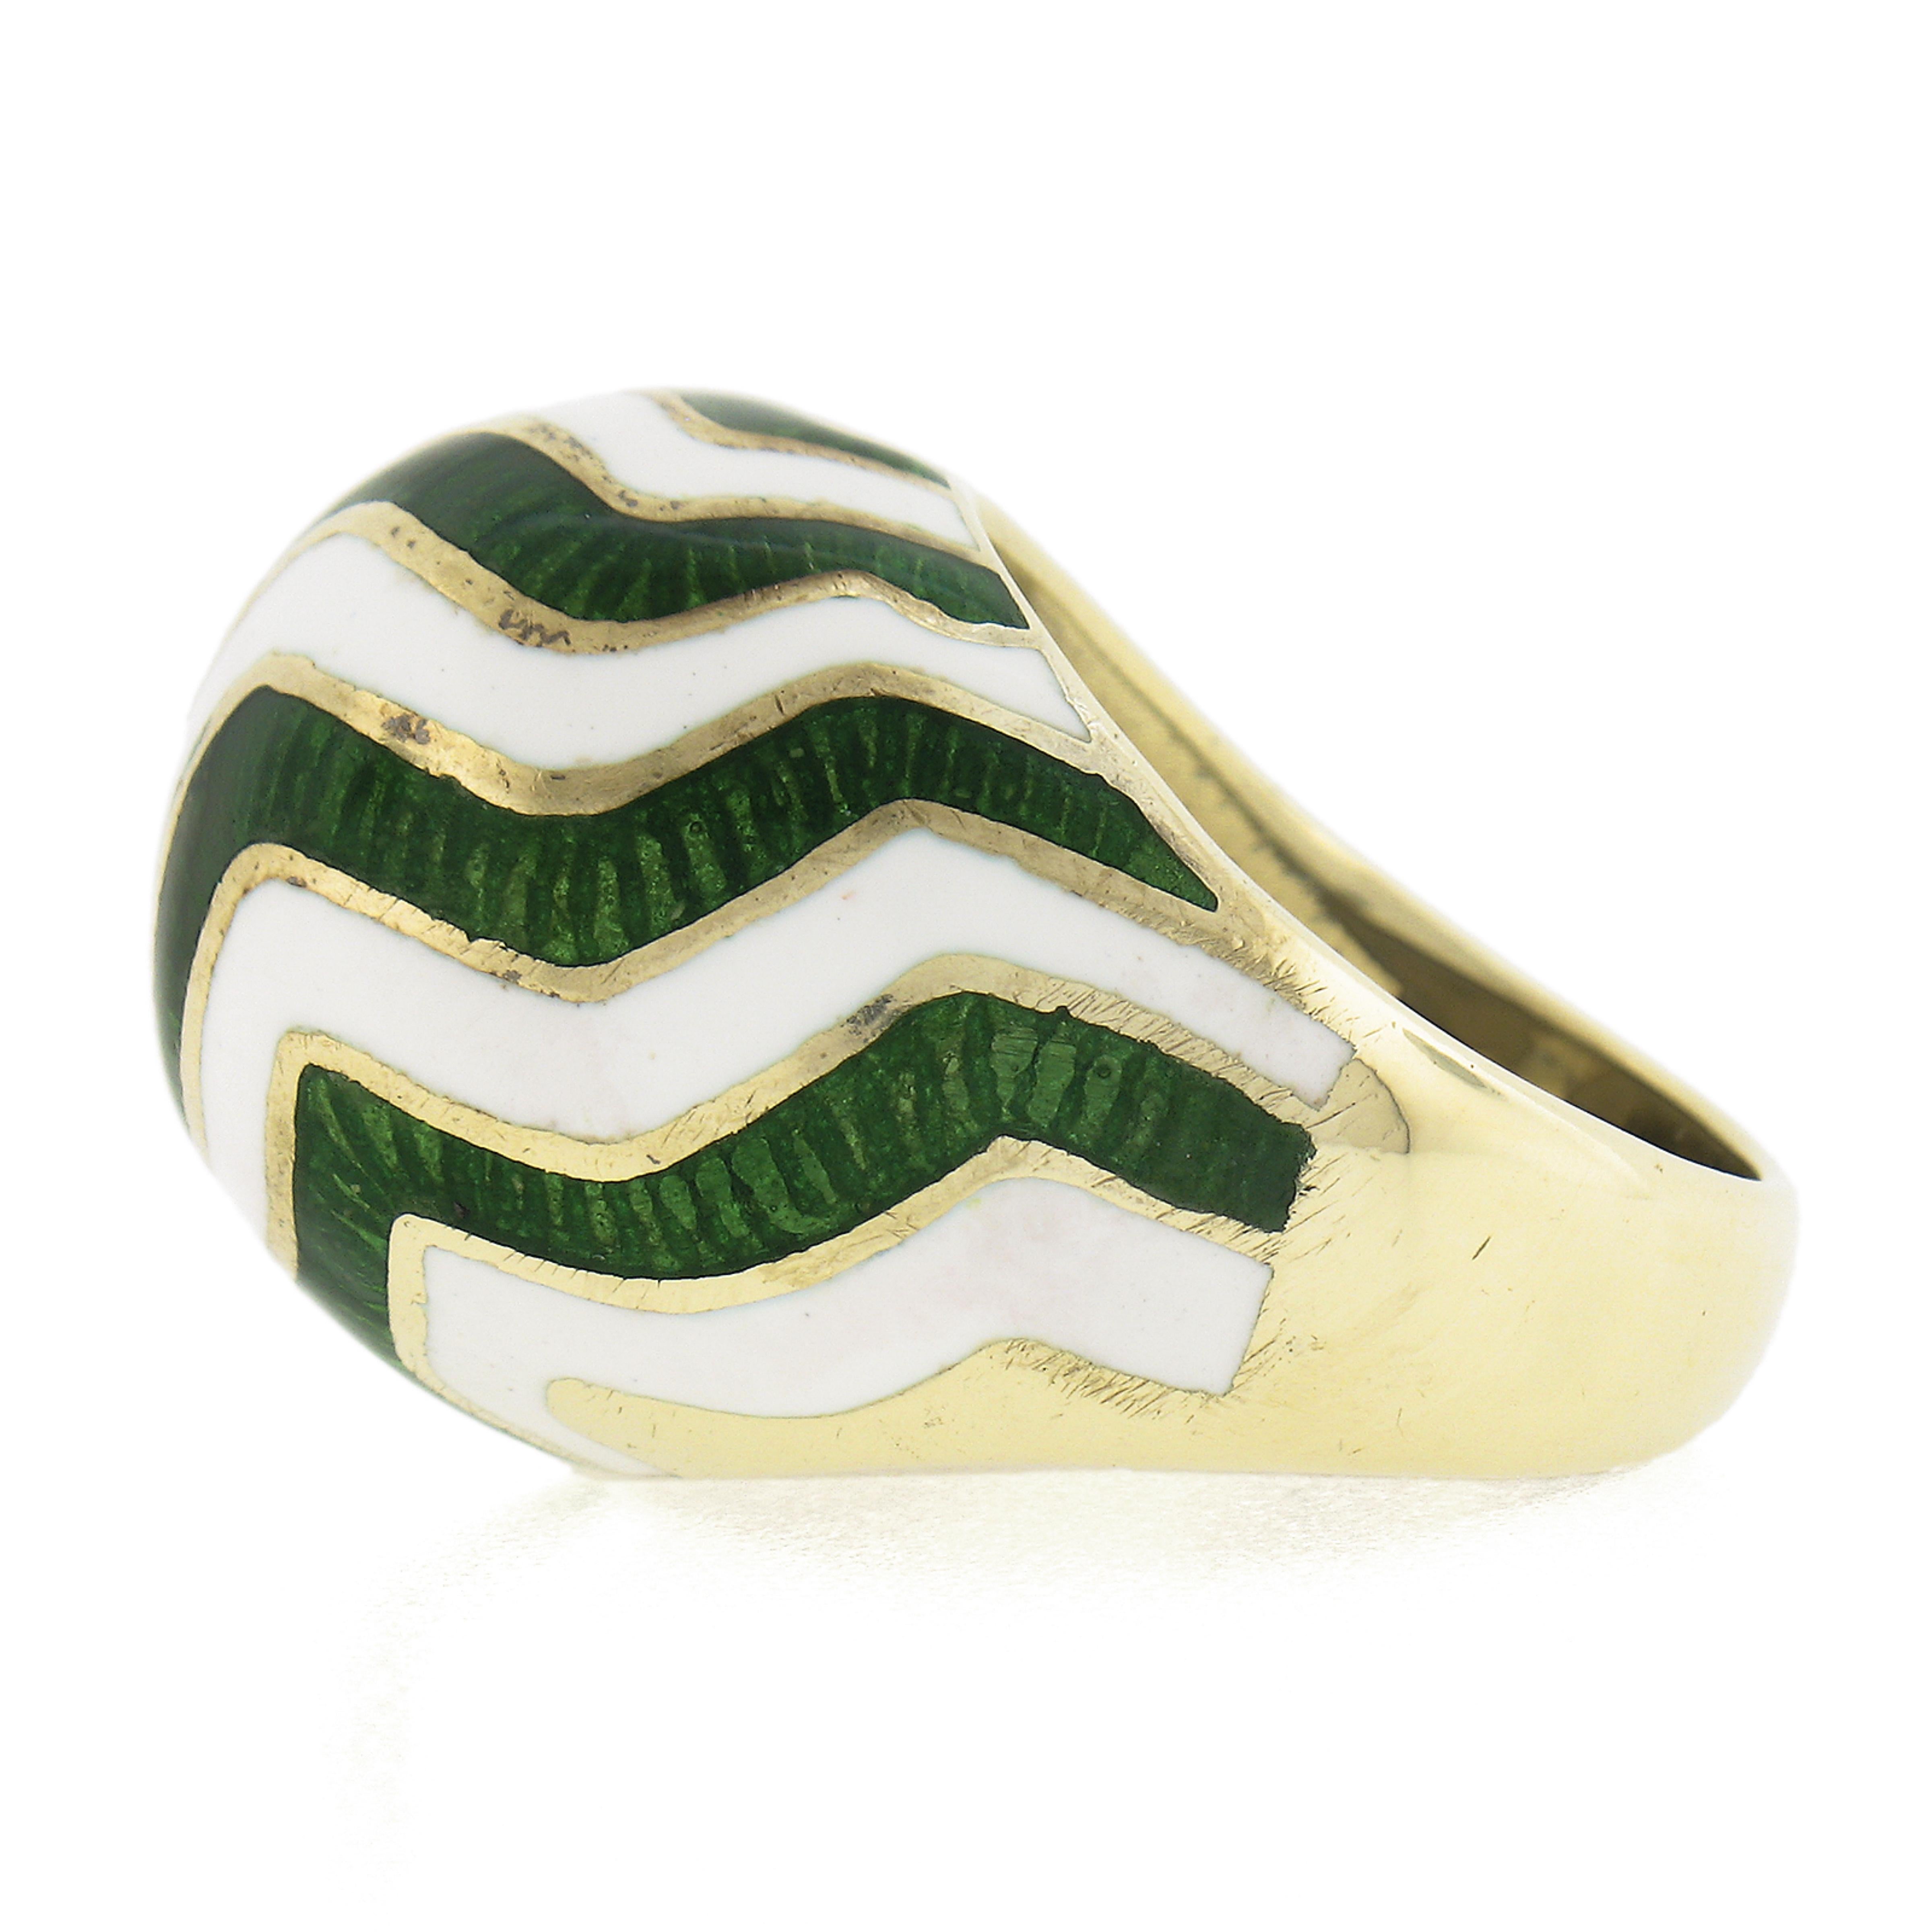 14K Yellow Gold White and Green Enamel Work Dome Bombe Cocktail Ring Size 6.5 For Sale 2